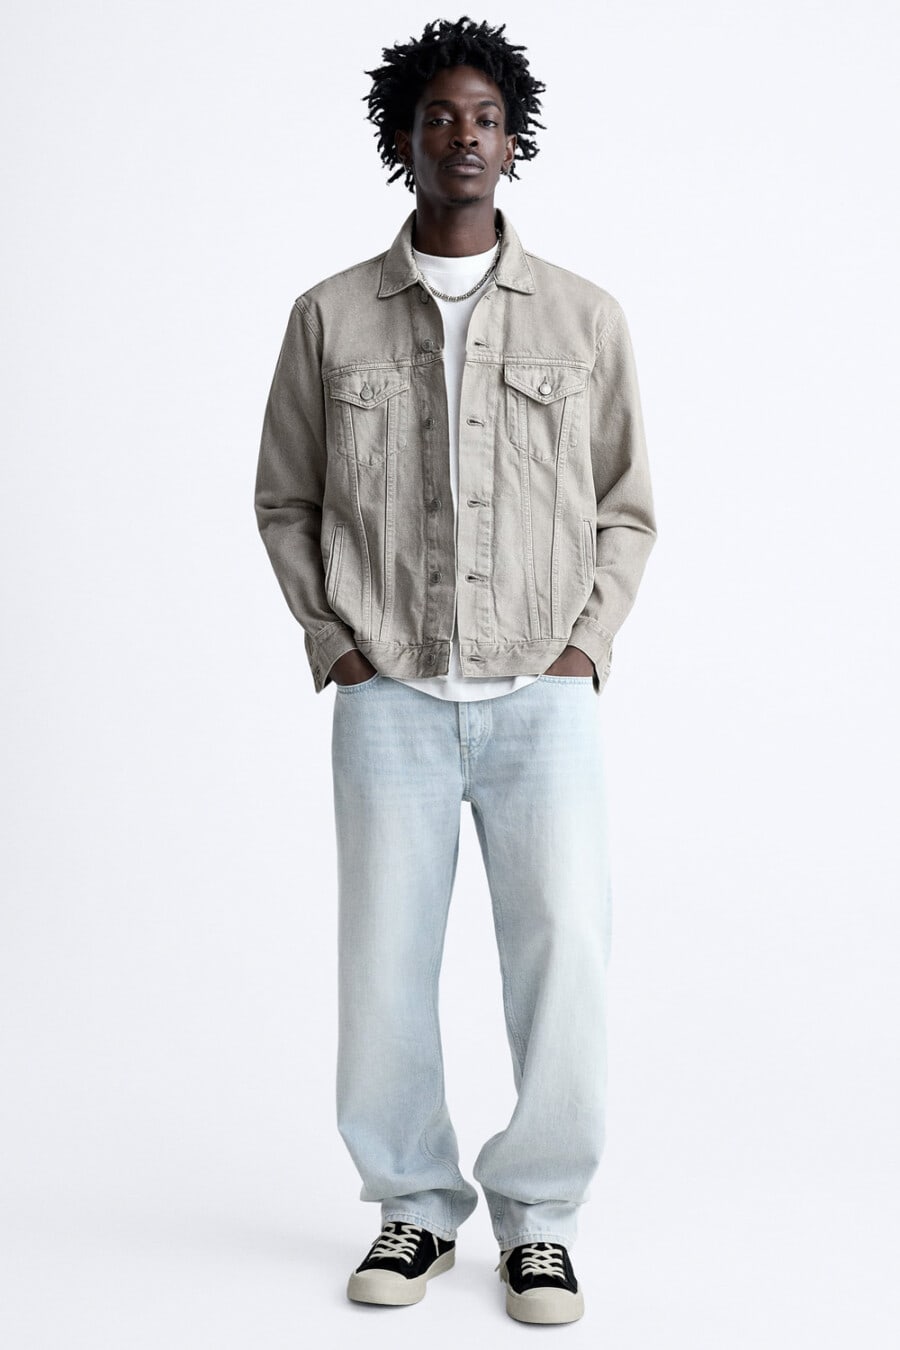 Men's light blue baggy jeans, white T-shirt, black chunky canvas sneakers and grey denim jacket outfit